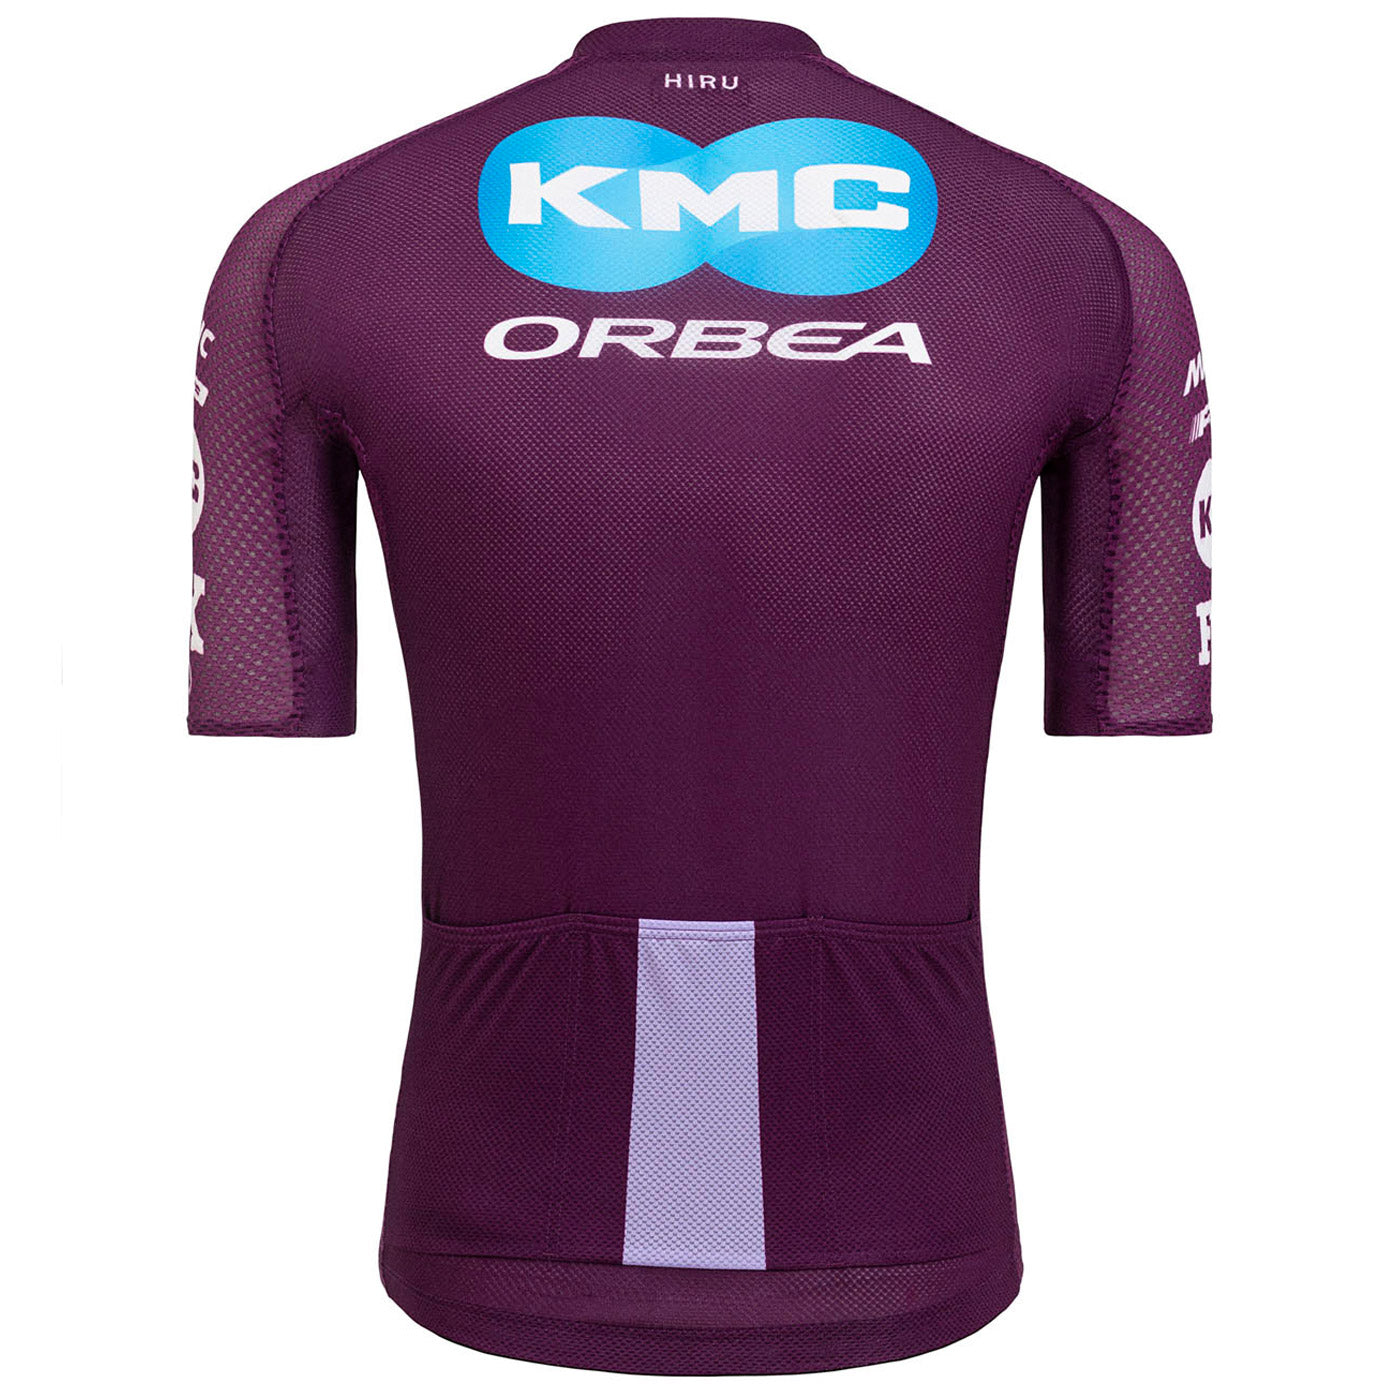 Team KMC Orbea 2022 jersey | All4cycling